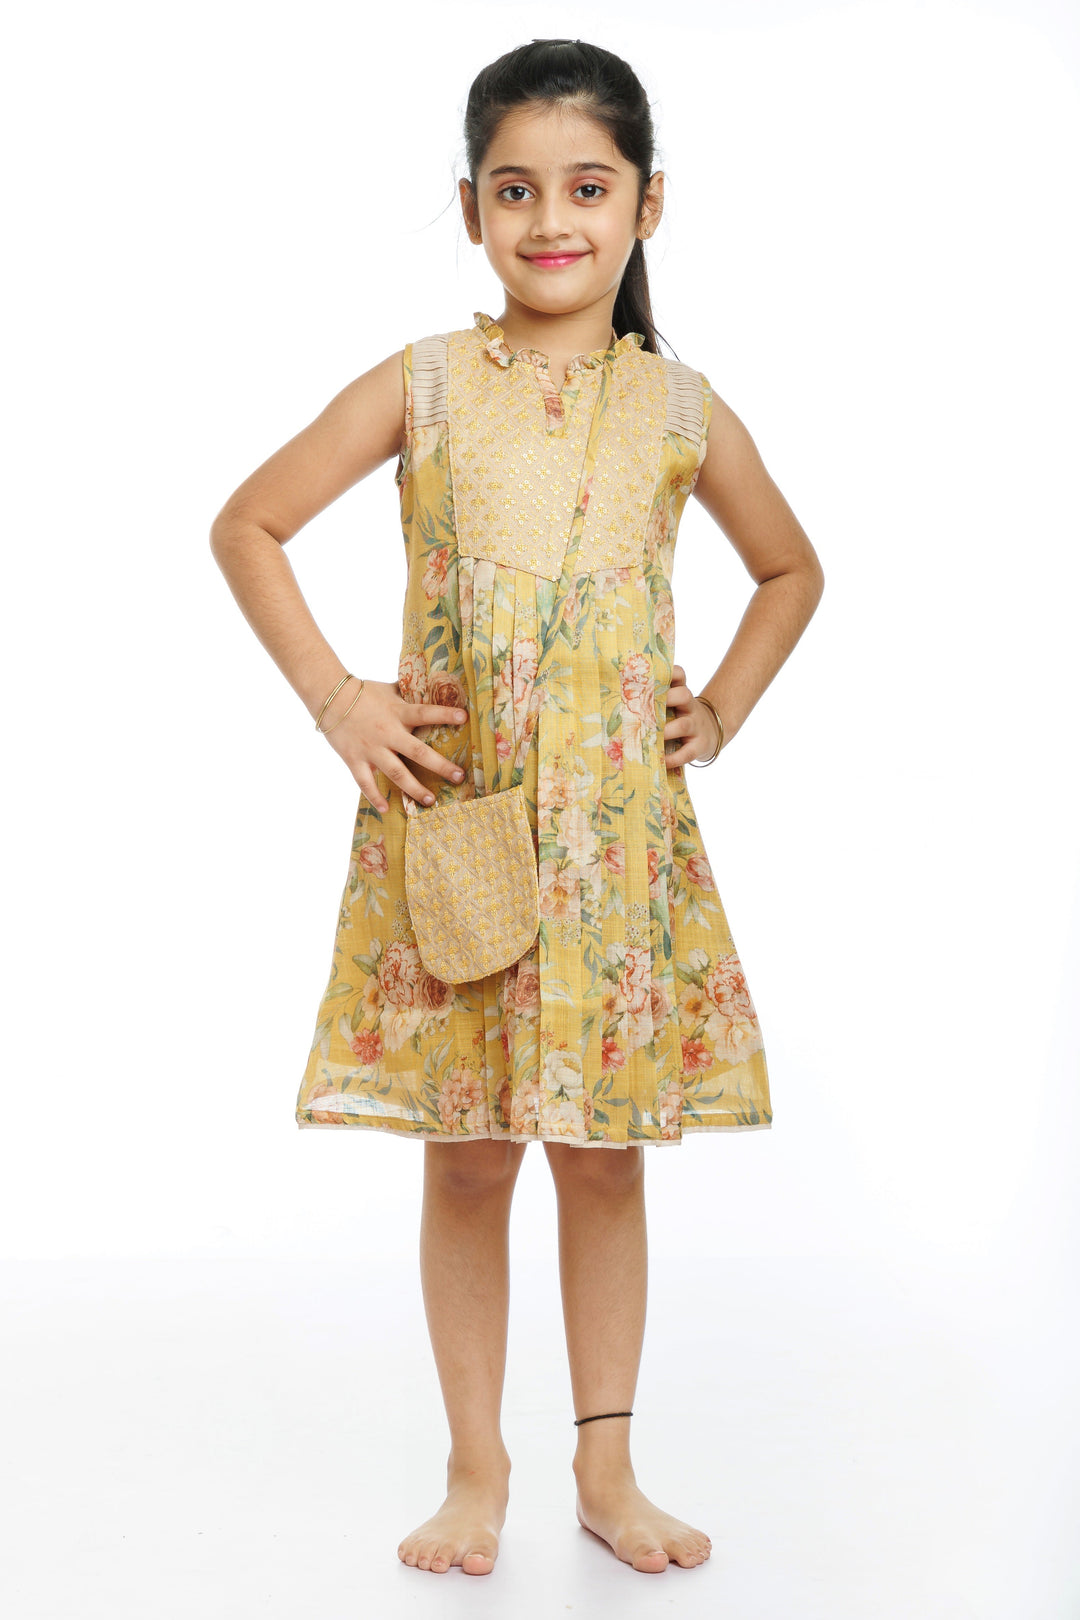 The Nesavu Girls Cotton Frock Golden Blossom: Girl's Playful Printed Cotton Frock Nesavu 22 (4Y) / Yellow / Cotton GFC1299B-22 Get the Latest in Childrens Fashion with Our Designer Cotton Frocks | The Nesavu